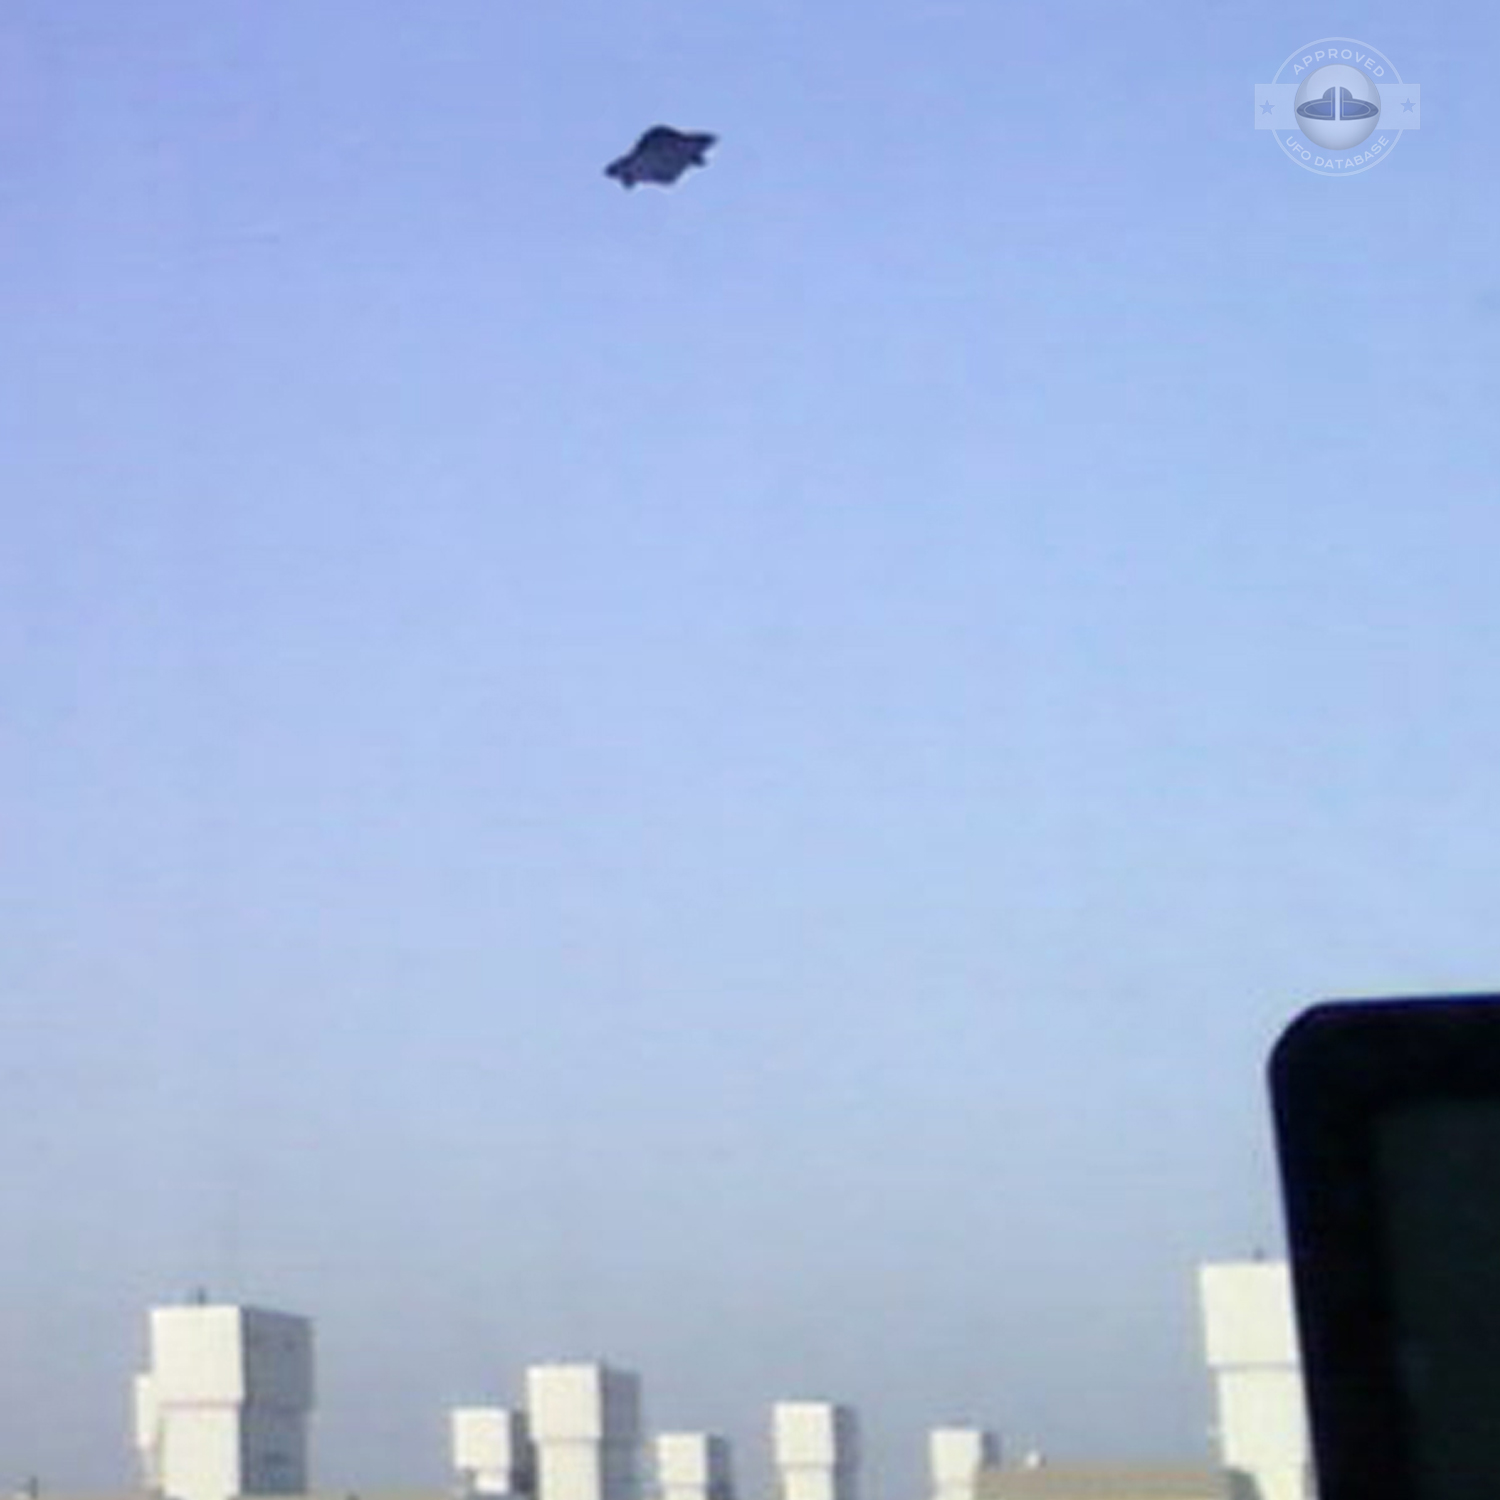 Teen student photograph incredible UFO picture | Koyang, South Korea UFO Picture #197-2